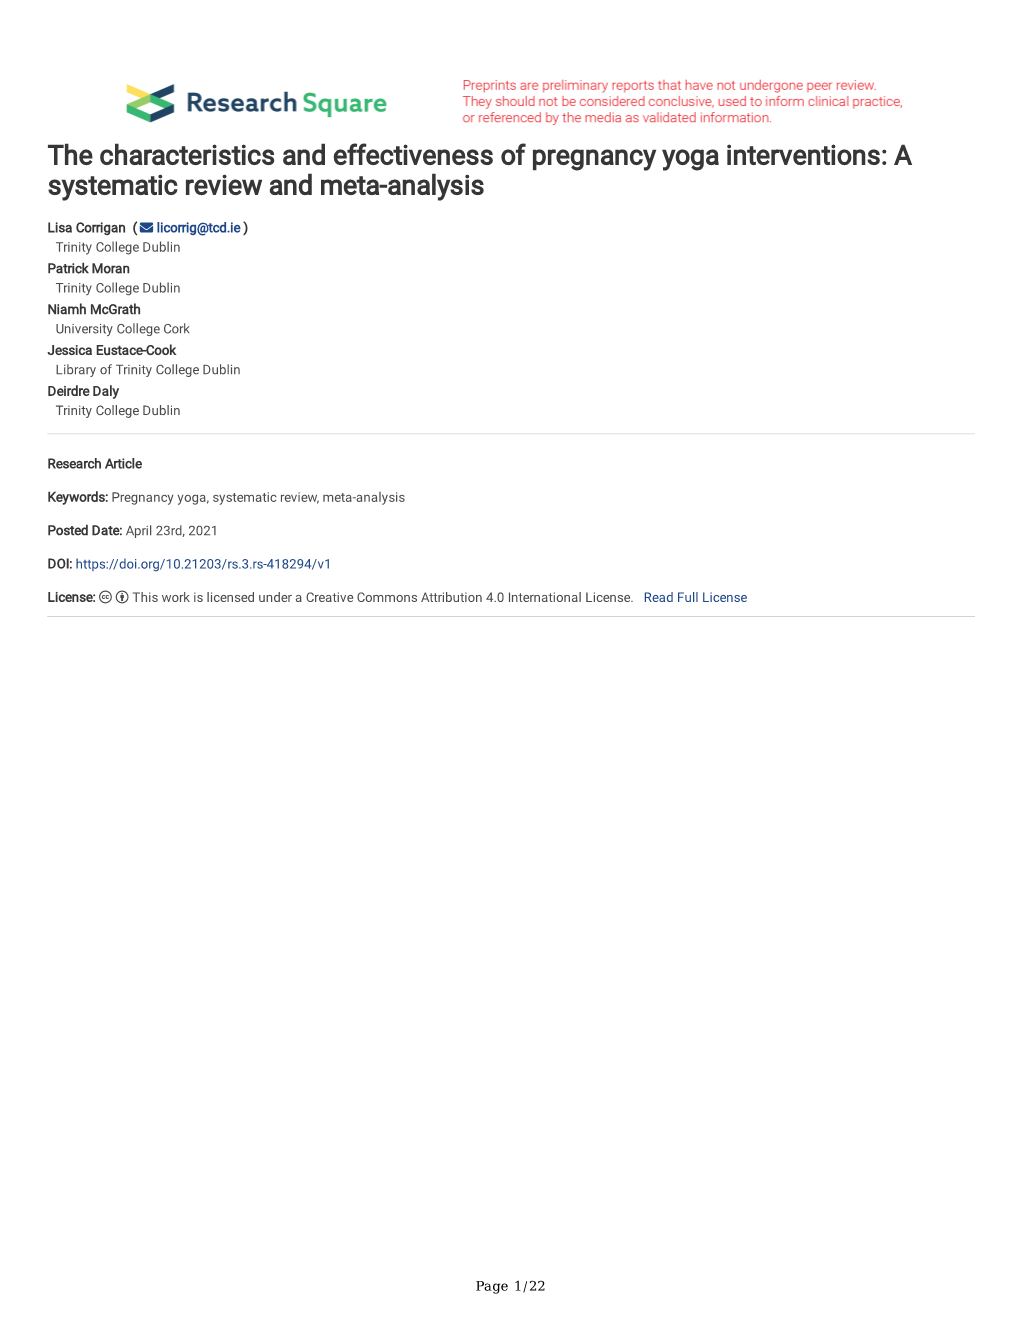 The Characteristics and Effectiveness of Pregnancy Yoga Interventions: a Systematic Review and Meta-Analysis